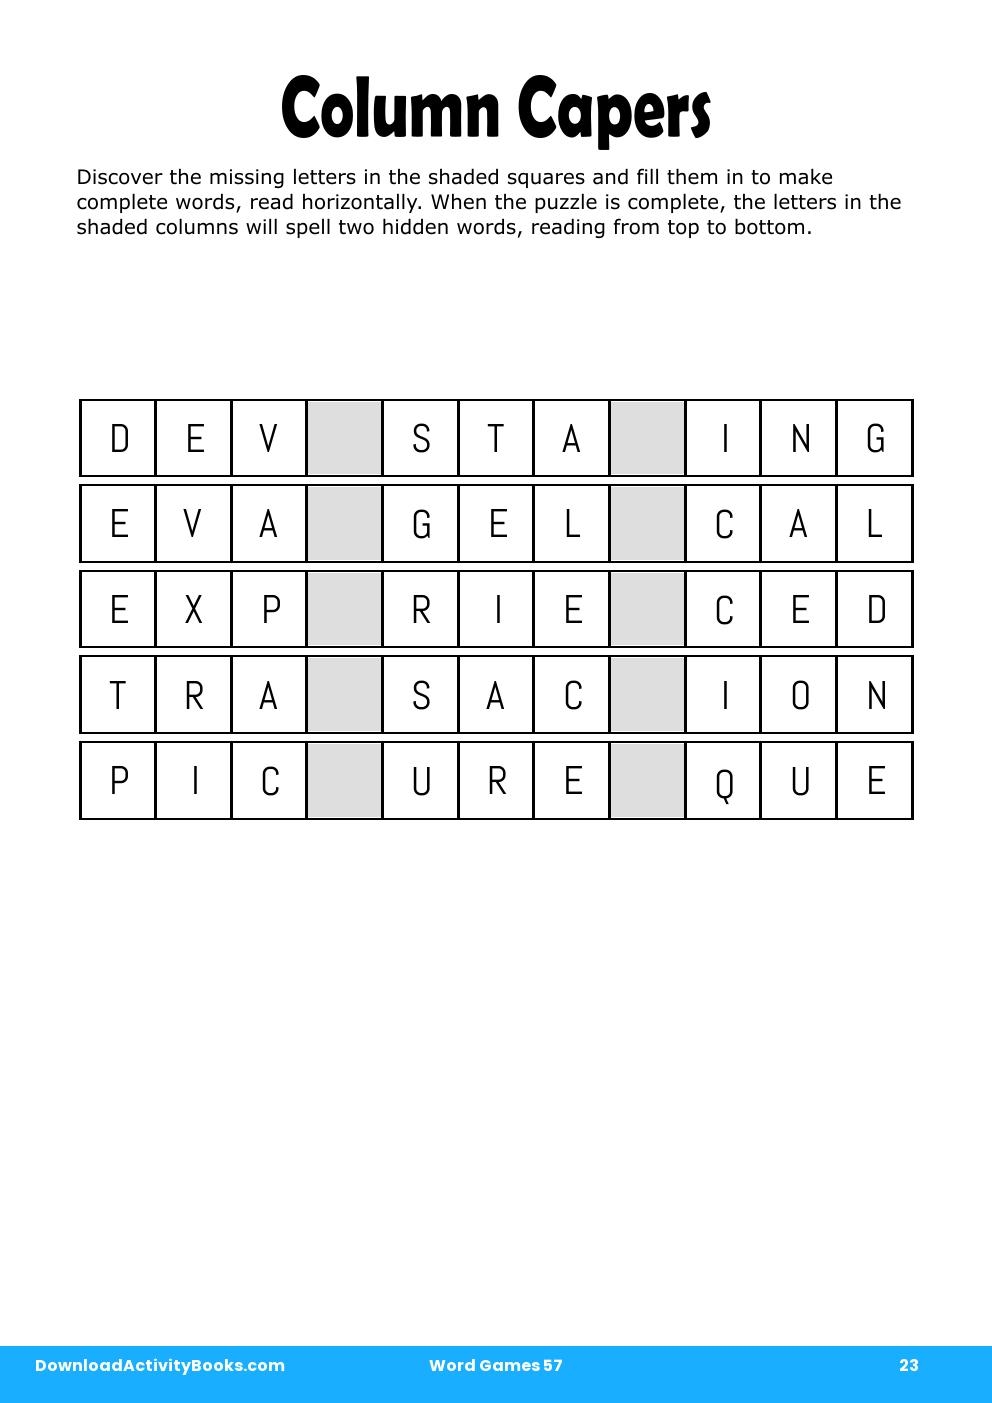 Column Capers in Word Games 57